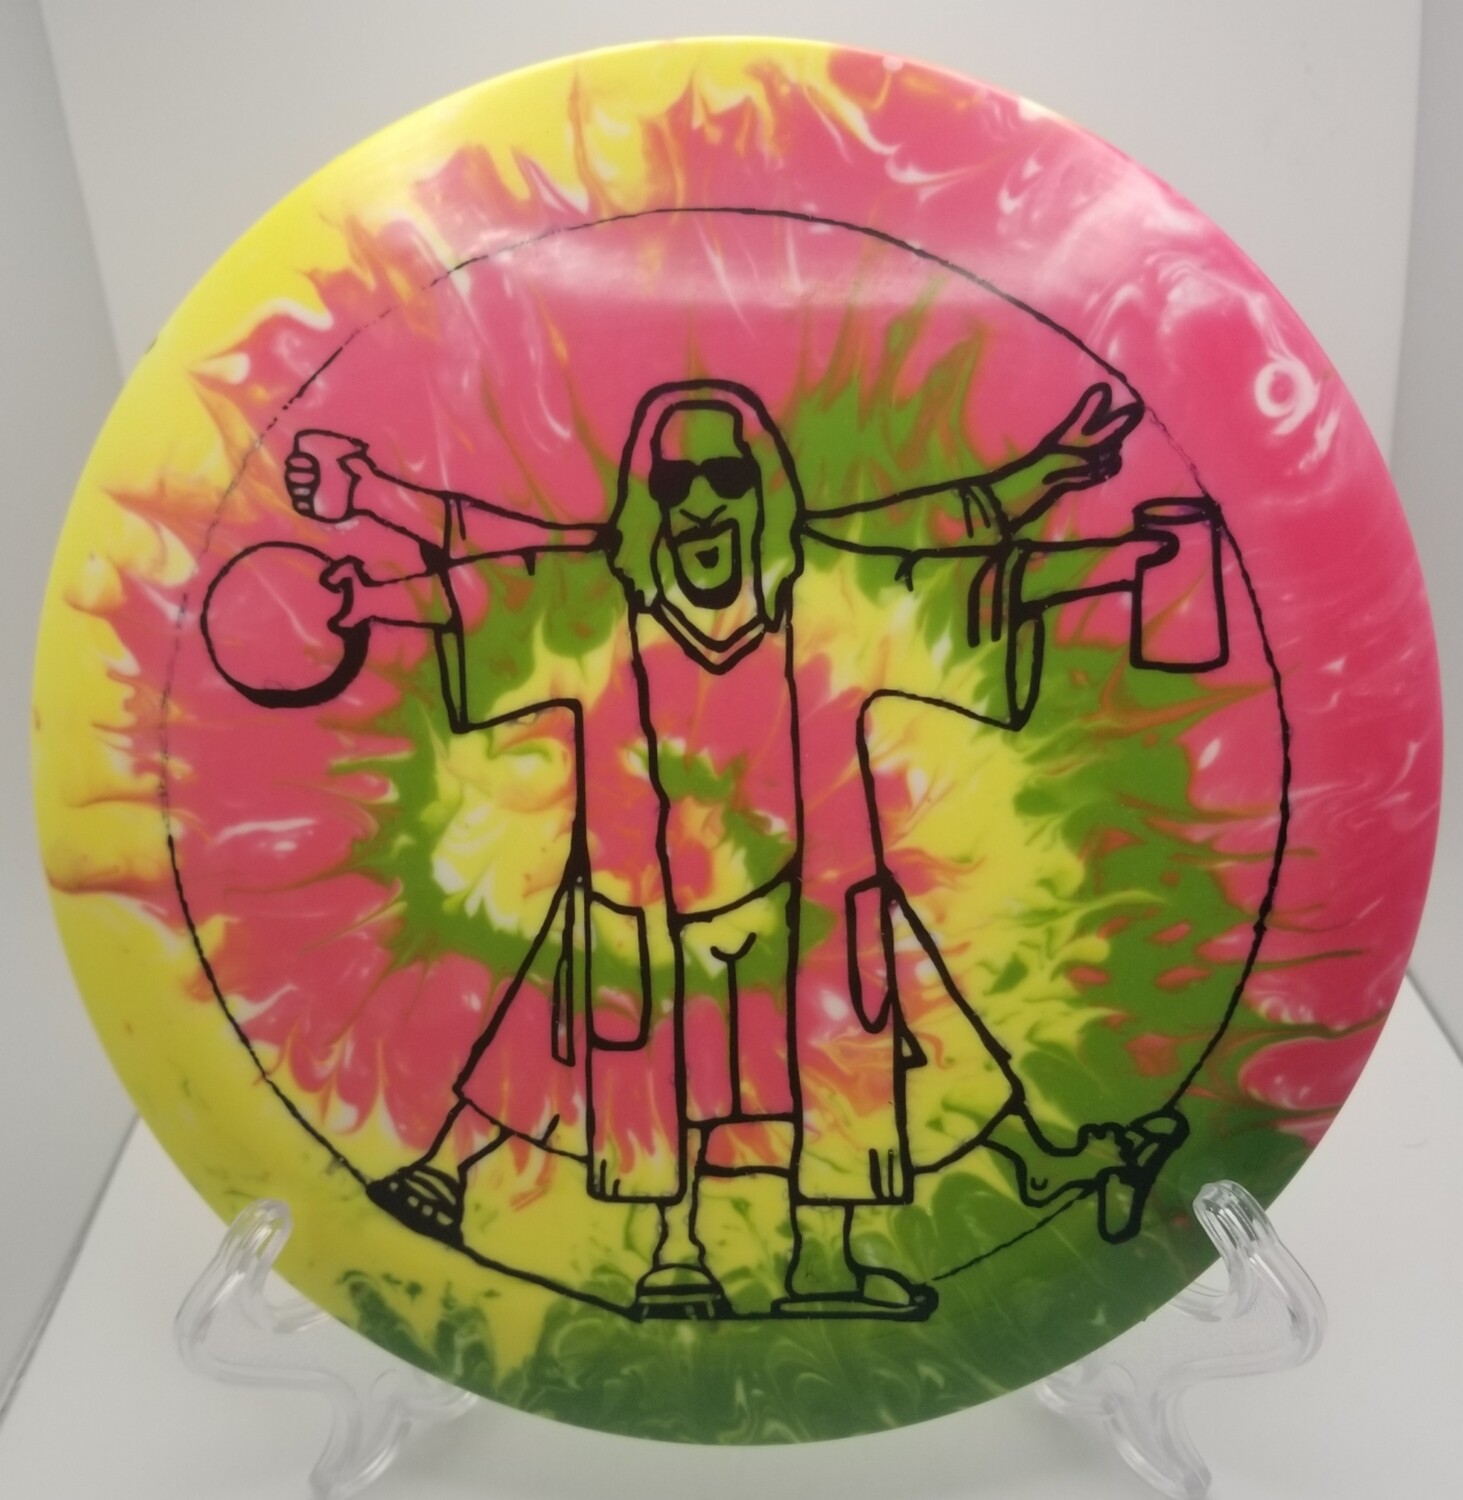 Dyed MVP Lift The Dude Abides design/DESIGN AVAILBLE FOR REMAKE Brought to you by Dyelicious Discs